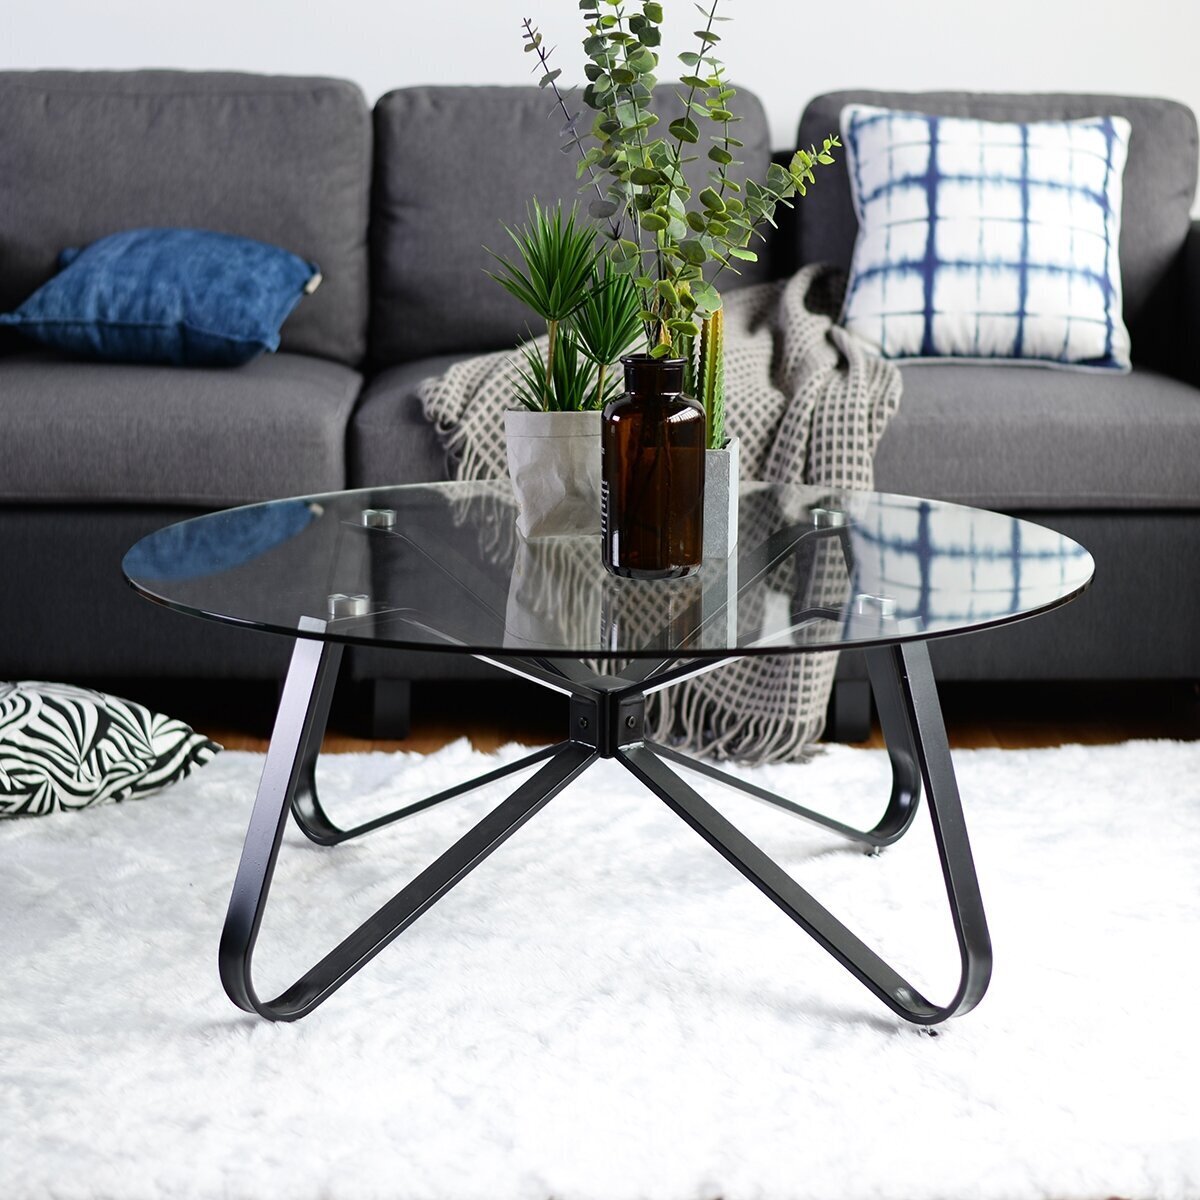 Matte Black Glass Top Table With Inverted Legs